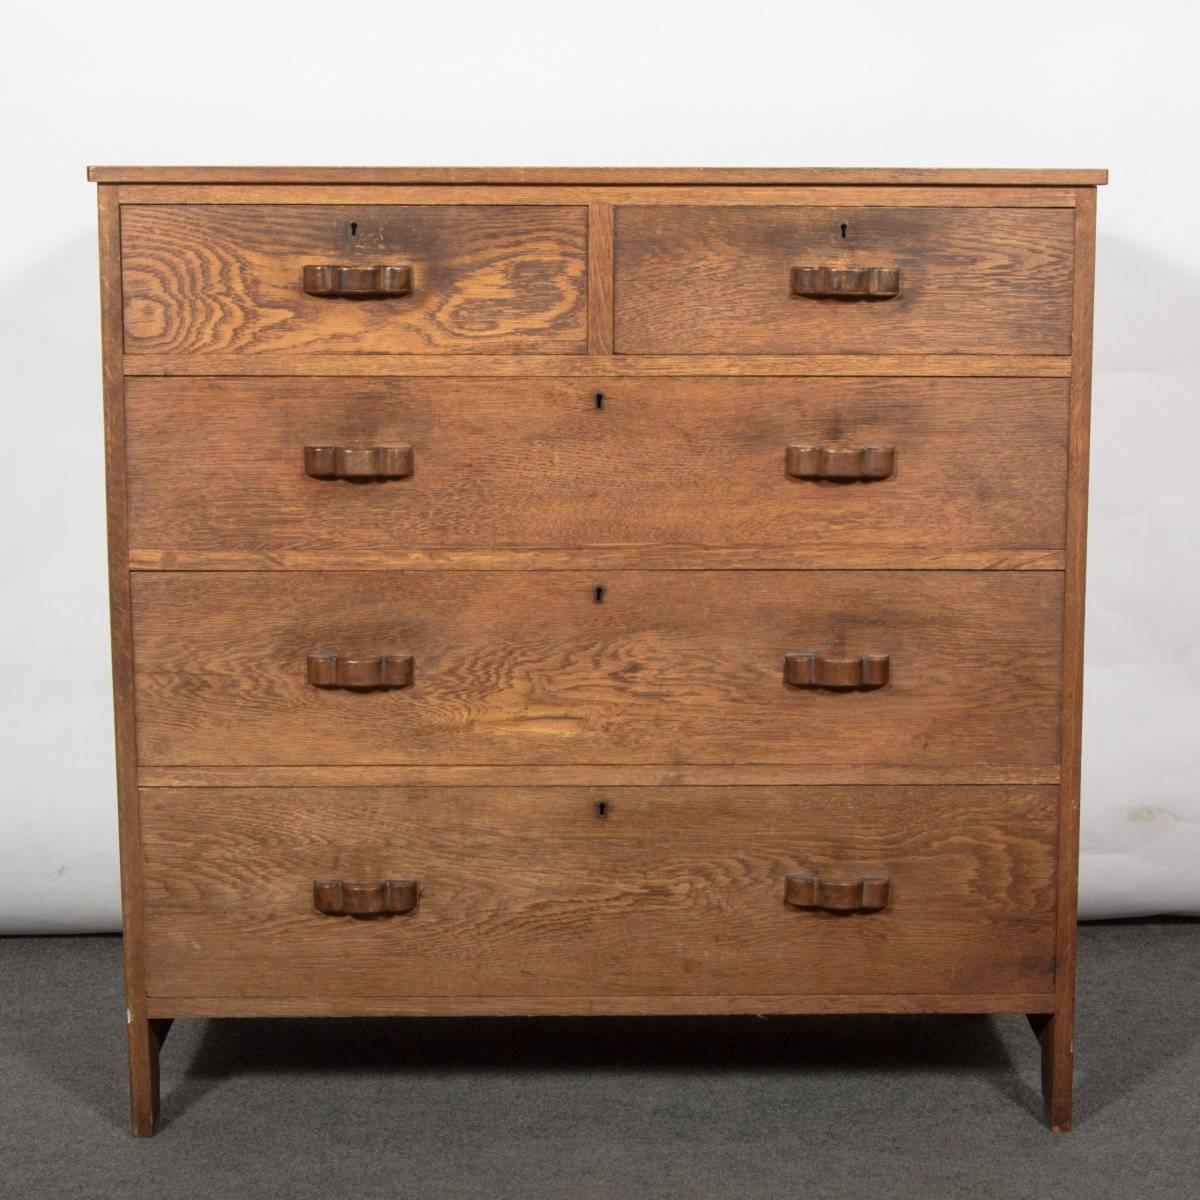 An Arts & Crafts Cotswold school oak chests of drawers in the style of Edward Barnsley with handmade walnut handles and exposed through tenon construction to the sides.